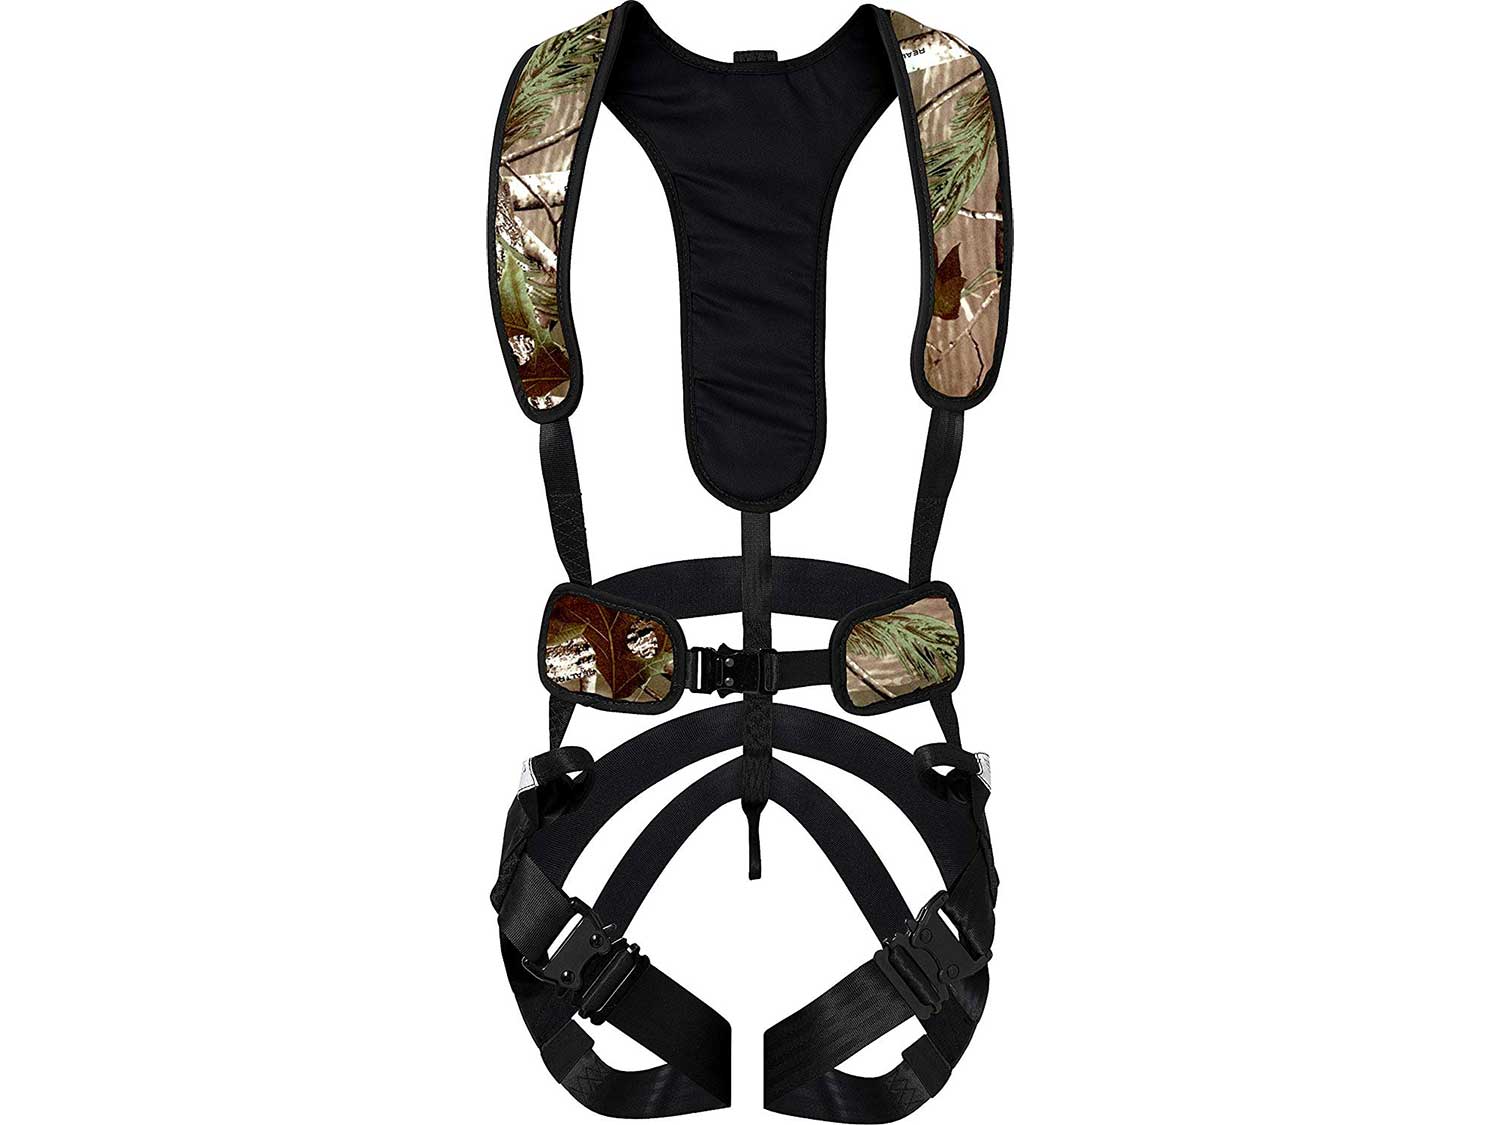 Hunter Safety System X-1 Bowhunter Treestand Safety Harness